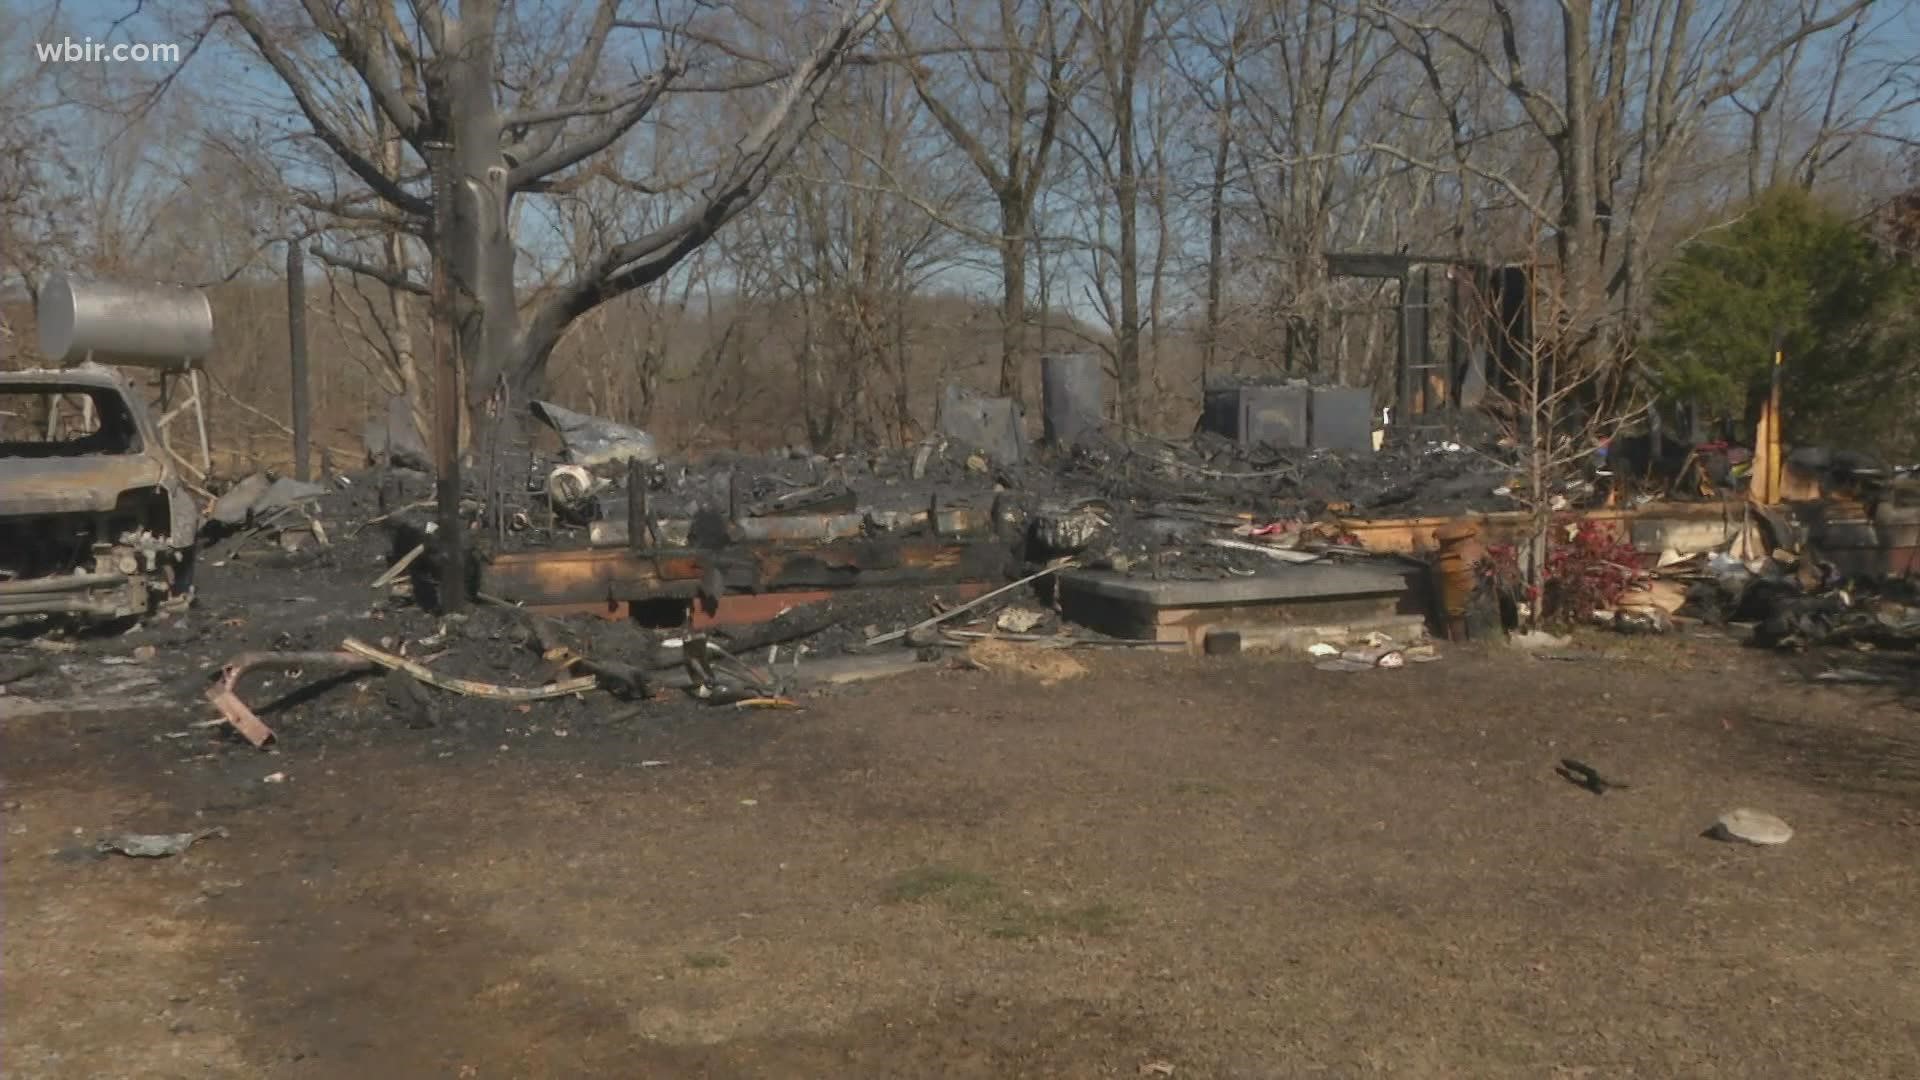 The McMinn County Sheriff's Office and the TBI are investigating a house fire that killed two people.